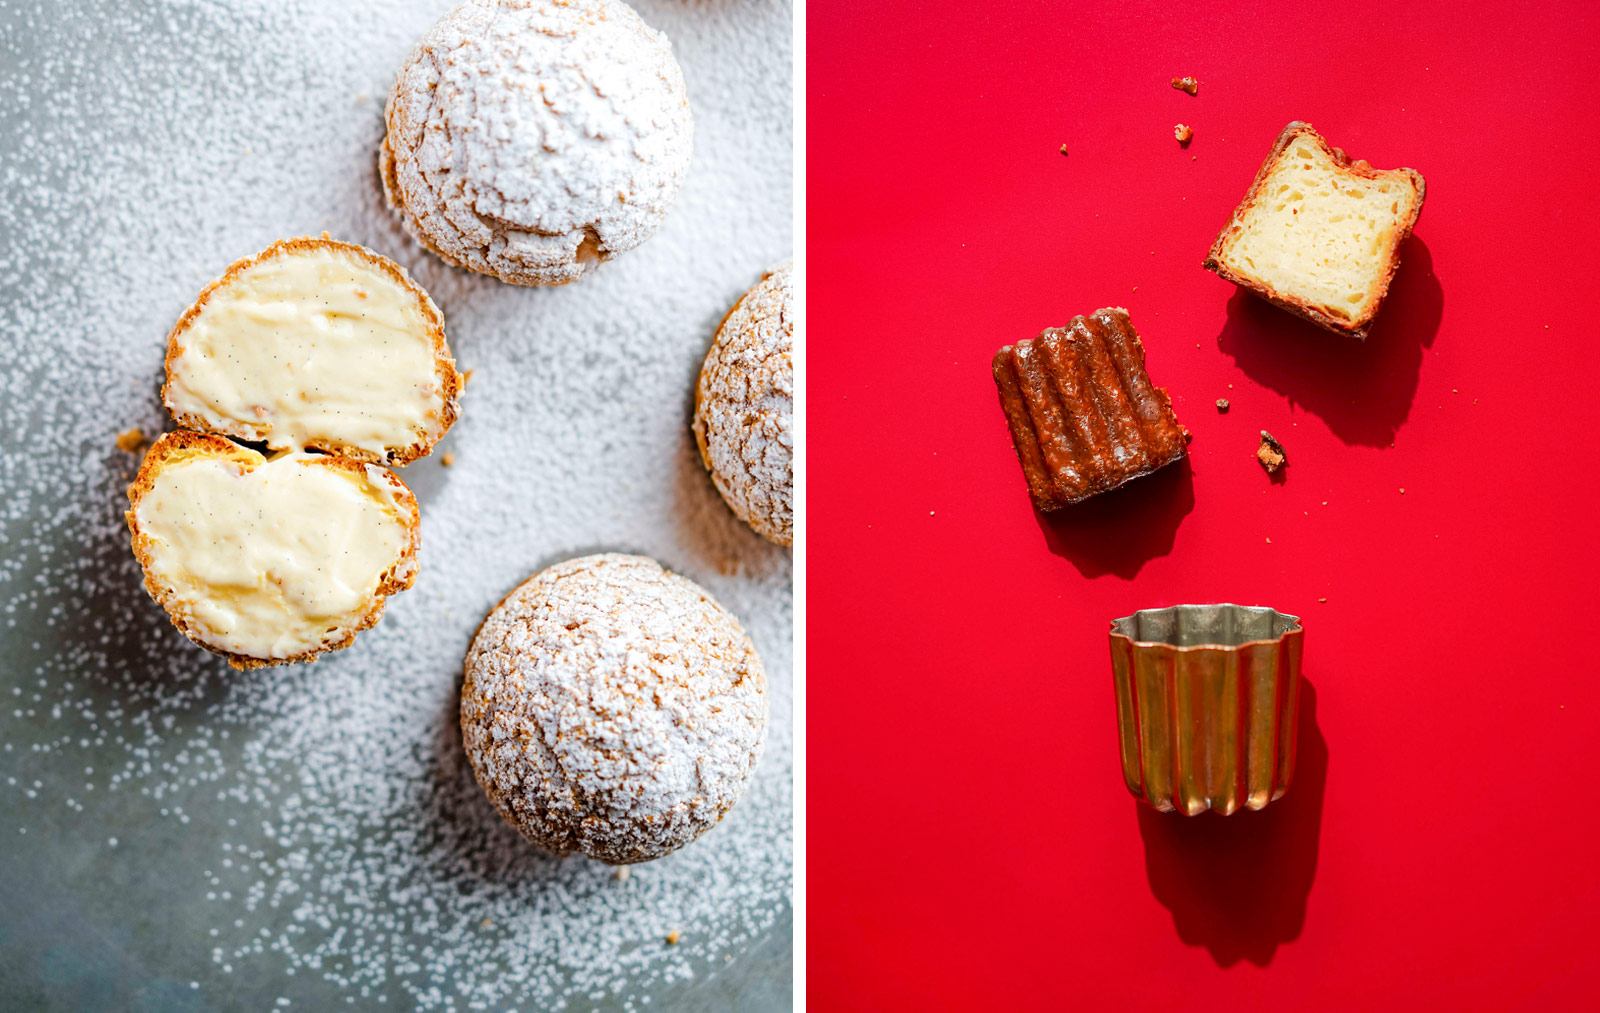 Vanilla chouquette and caneles from Freshly Baked by Richard Ekkebus 2.0